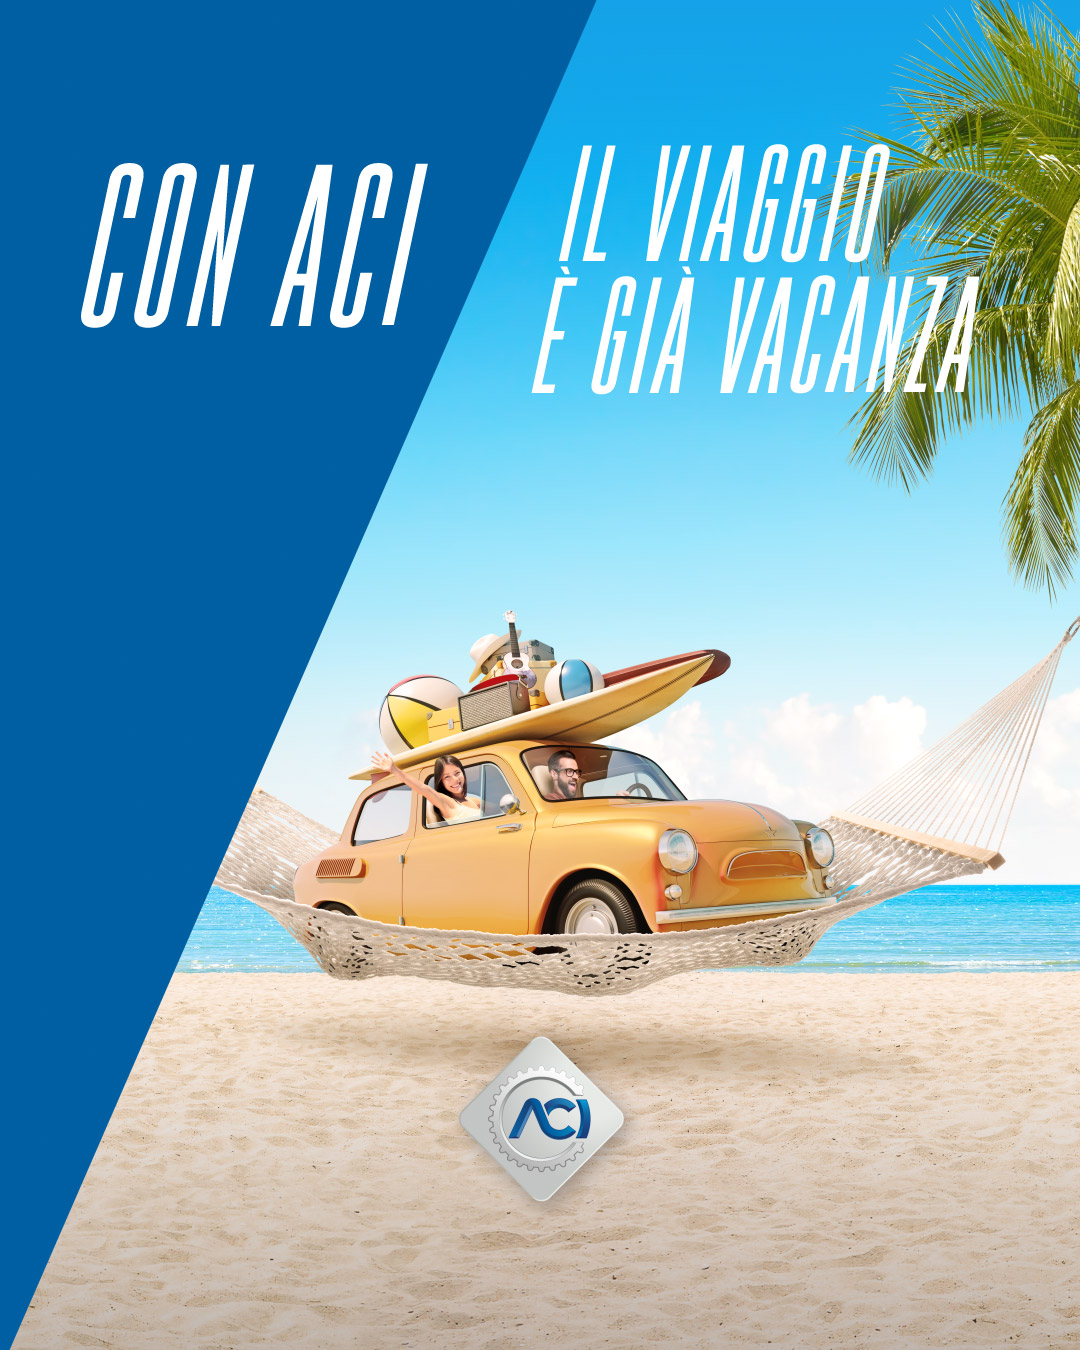 With ACI and Armando Testa your journey is already your holiday.